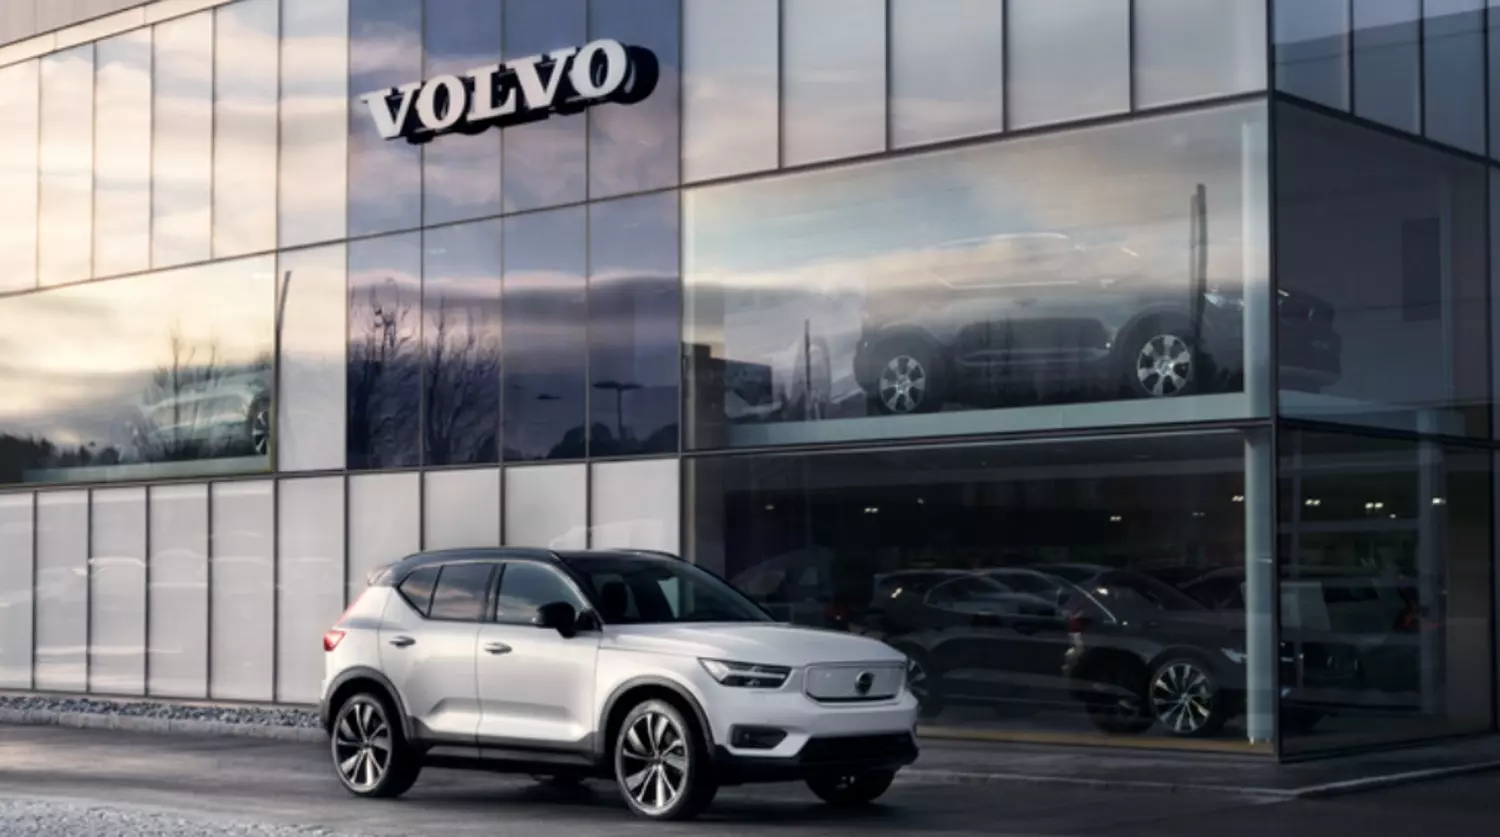 Volvo XC40 Sold Over 200,000 Units in 2021